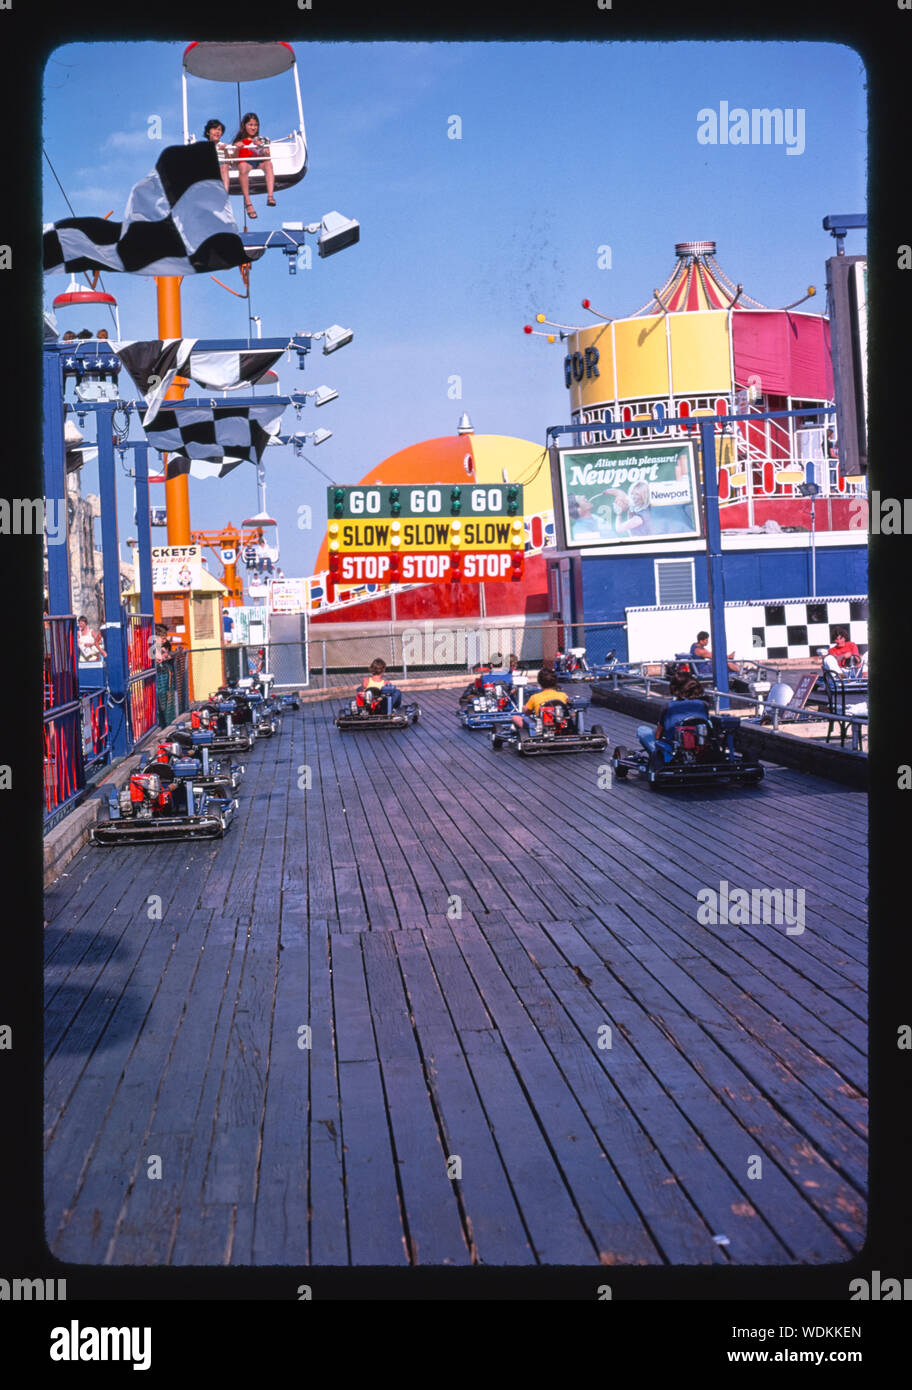 Go carts, Seaside Heights, New Jersey Stock Photo